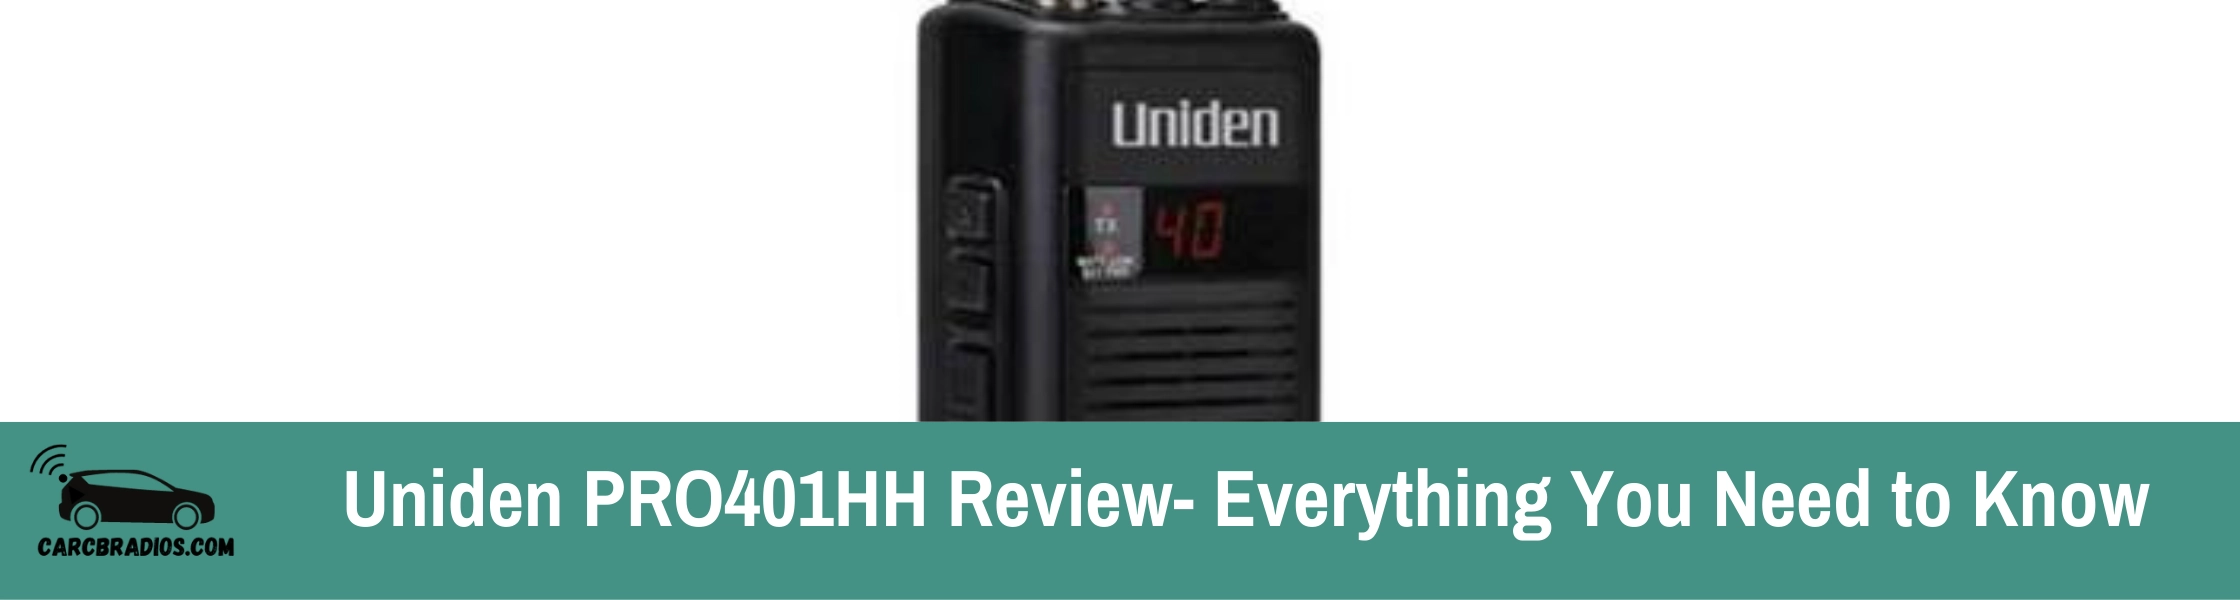 Uniden PRO401HH Review- Everything You Need to Know